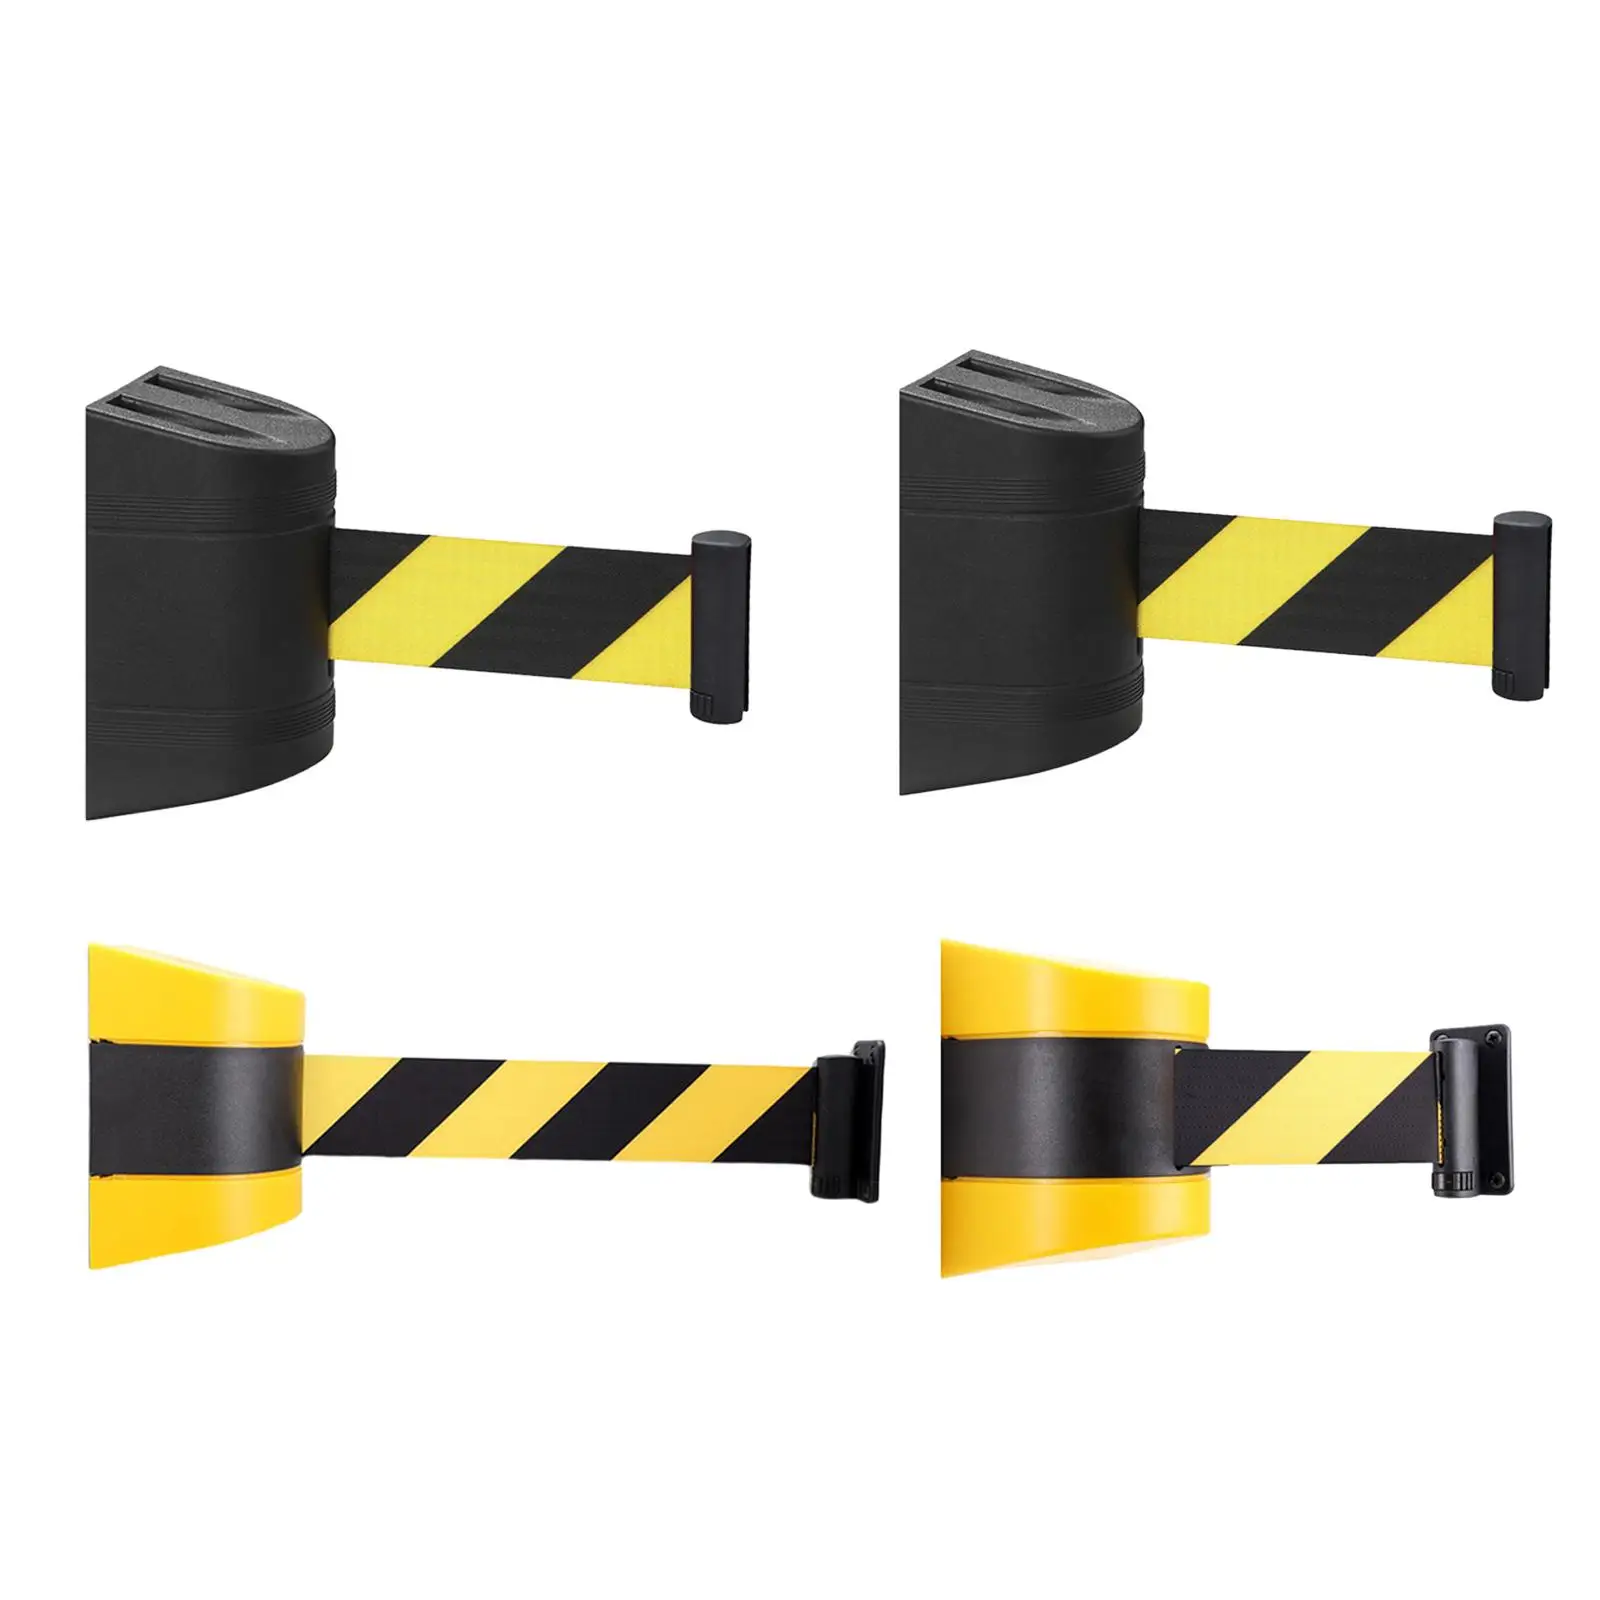 Crowd Control Wall Barrier Fixed Save Space Retractable Barrier Belt for Corridor Cash Register Sporting Events Stadiums Parades